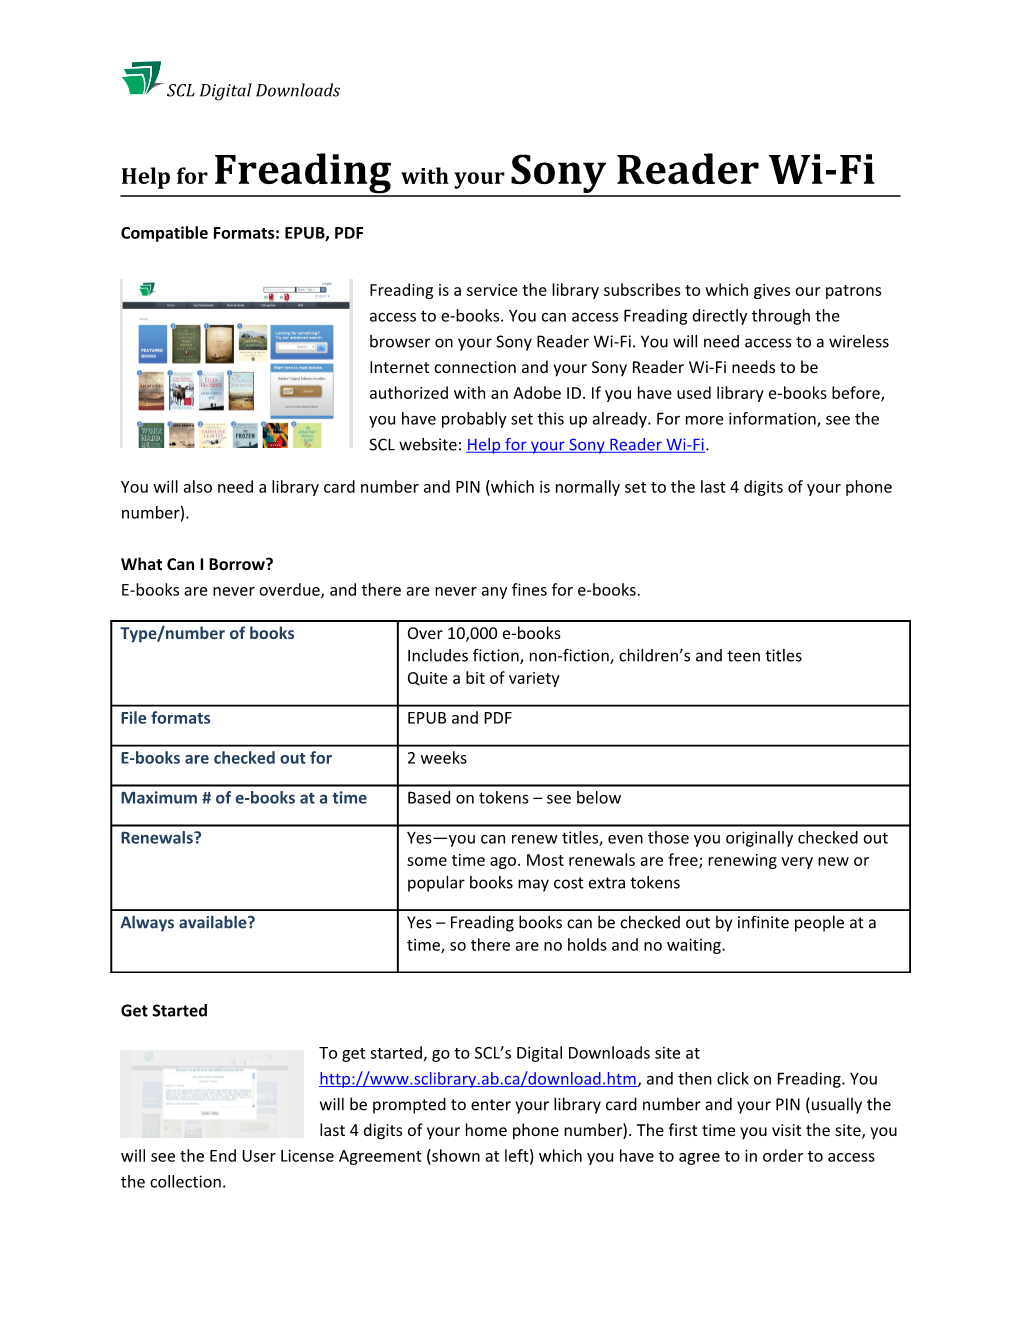 Help Forfreadingwith Your Sony Reader Wi-Fi